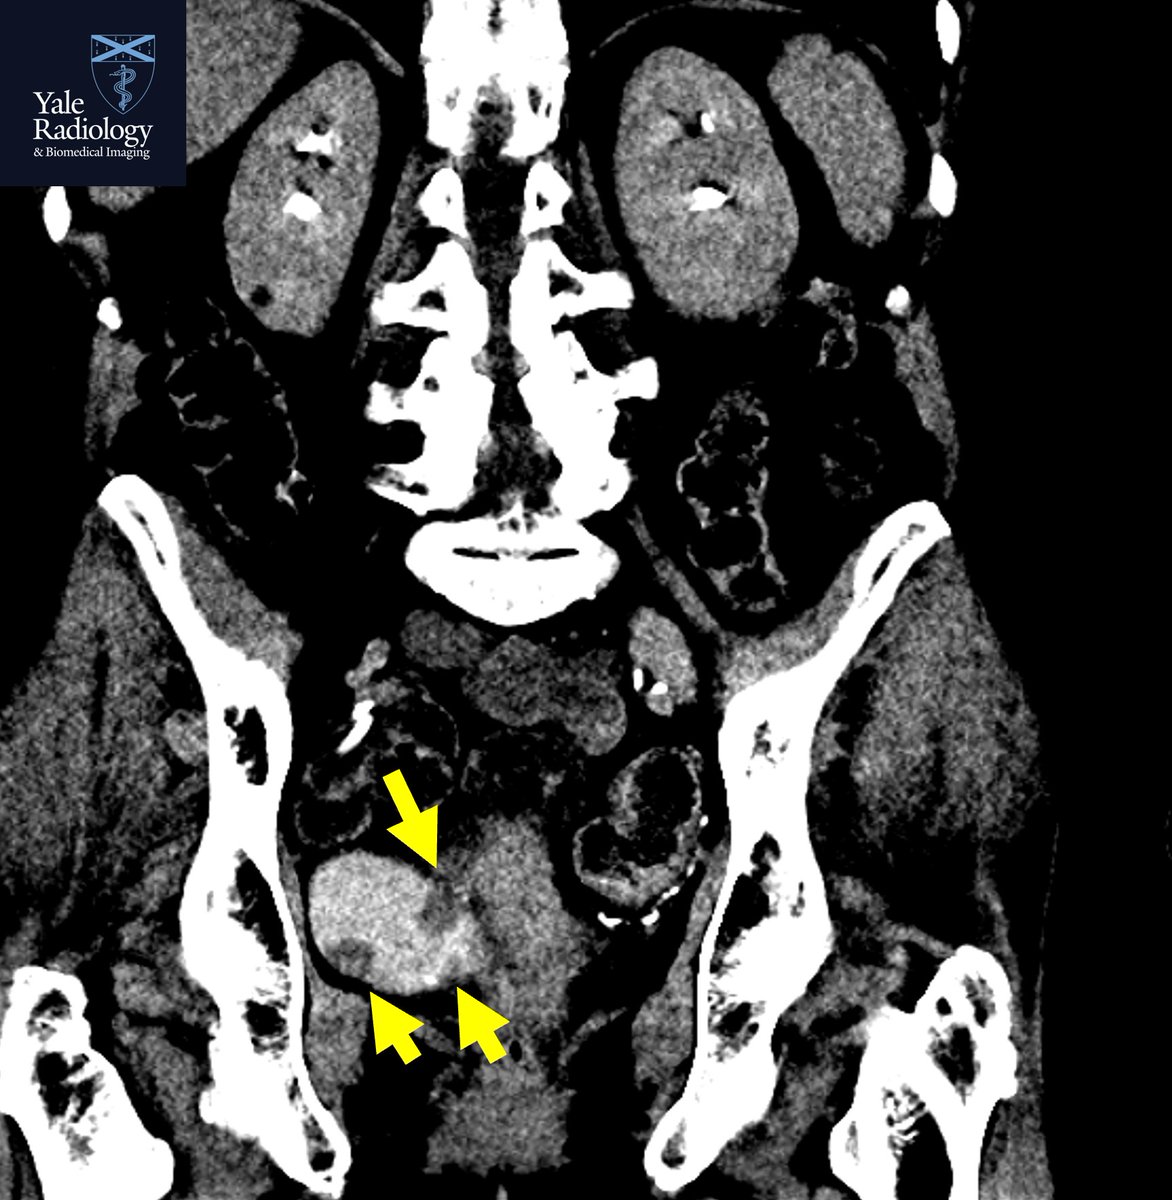 TEACHING COD: despite the bladder not optimally filling with contrast, note the multifocal masses in this patient w/ hematuria #yaleradedu #yaleradiology #FOAMrad #FOAMed #radres #medstudent #radiology @Mahan_Mathur @YaleRadiology #MedTwitter